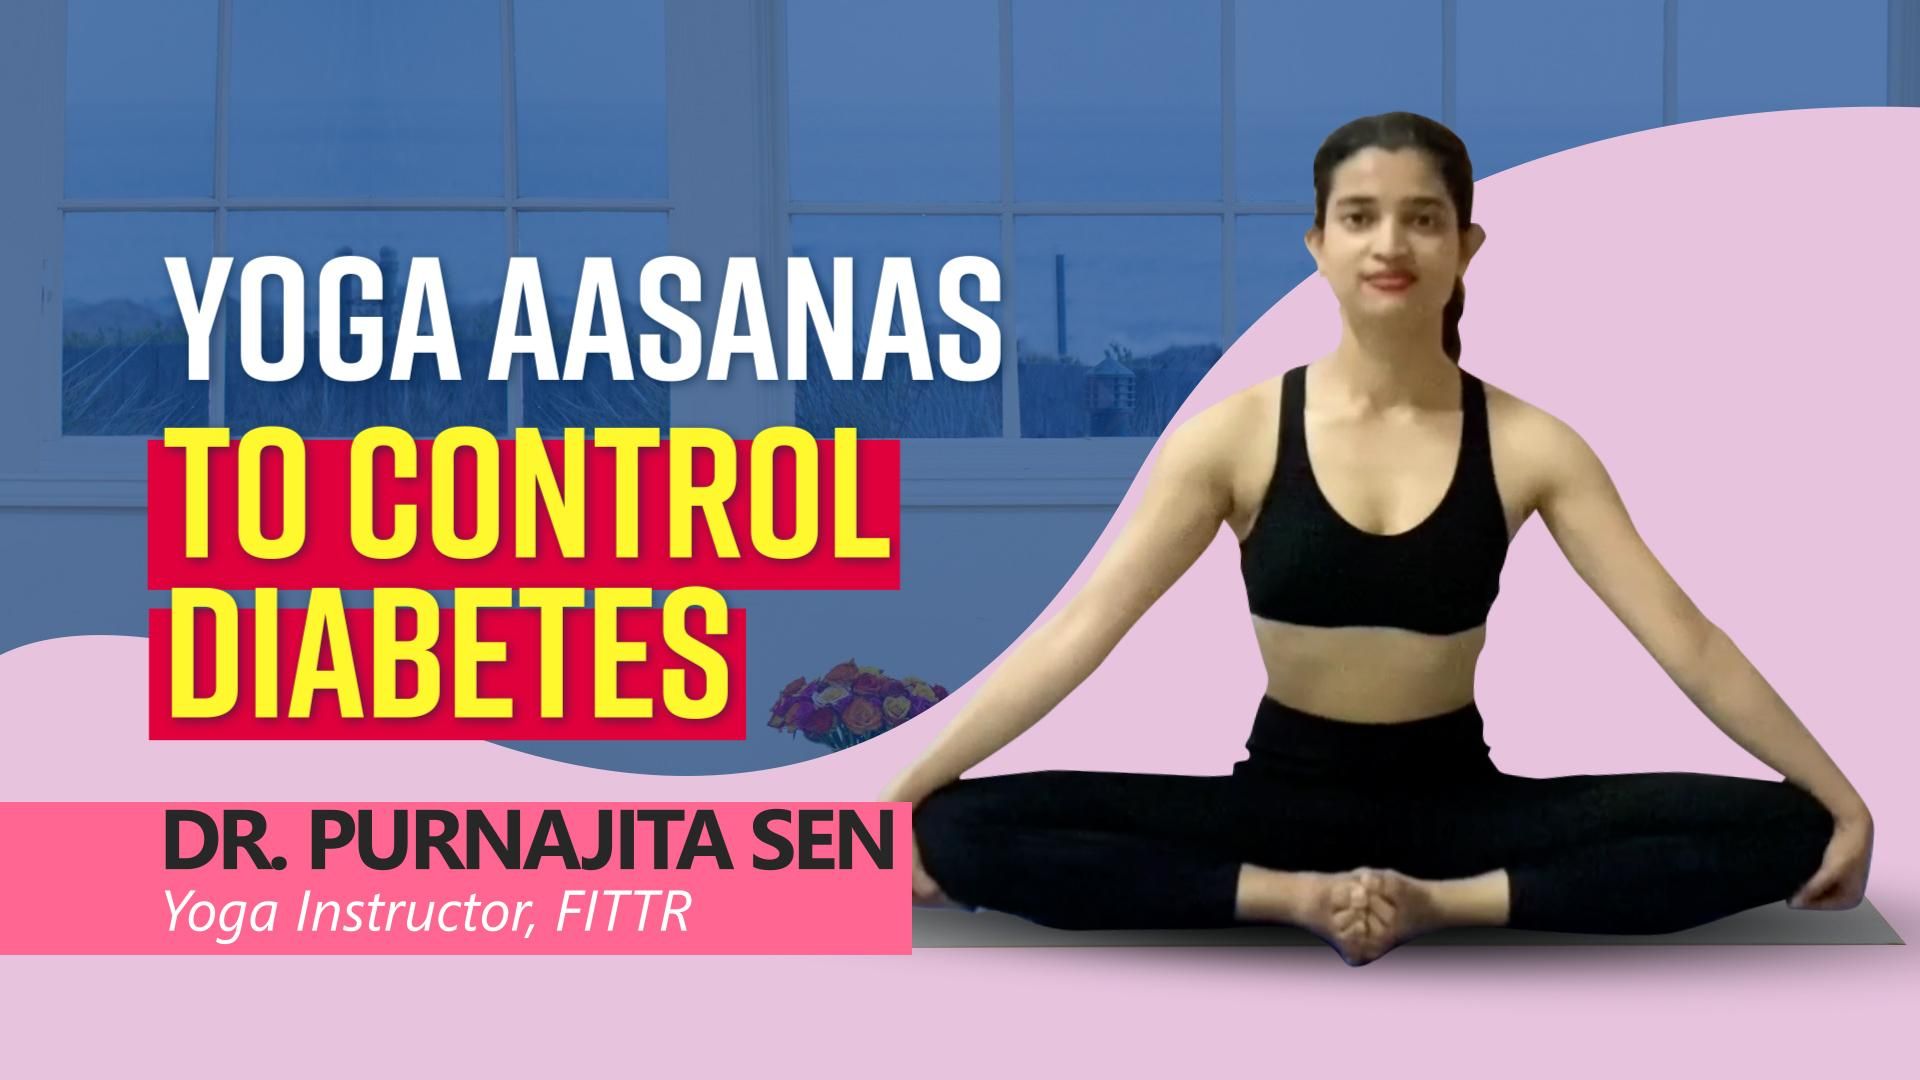 Yoga Asanas That Will Help With Diabetes 1.Vakrasana stimulates the  pancreas, making it beneficial for diabetics. This yoga pose regulates the  secretion of digestive juices, which helps combat digestive issues. people  who